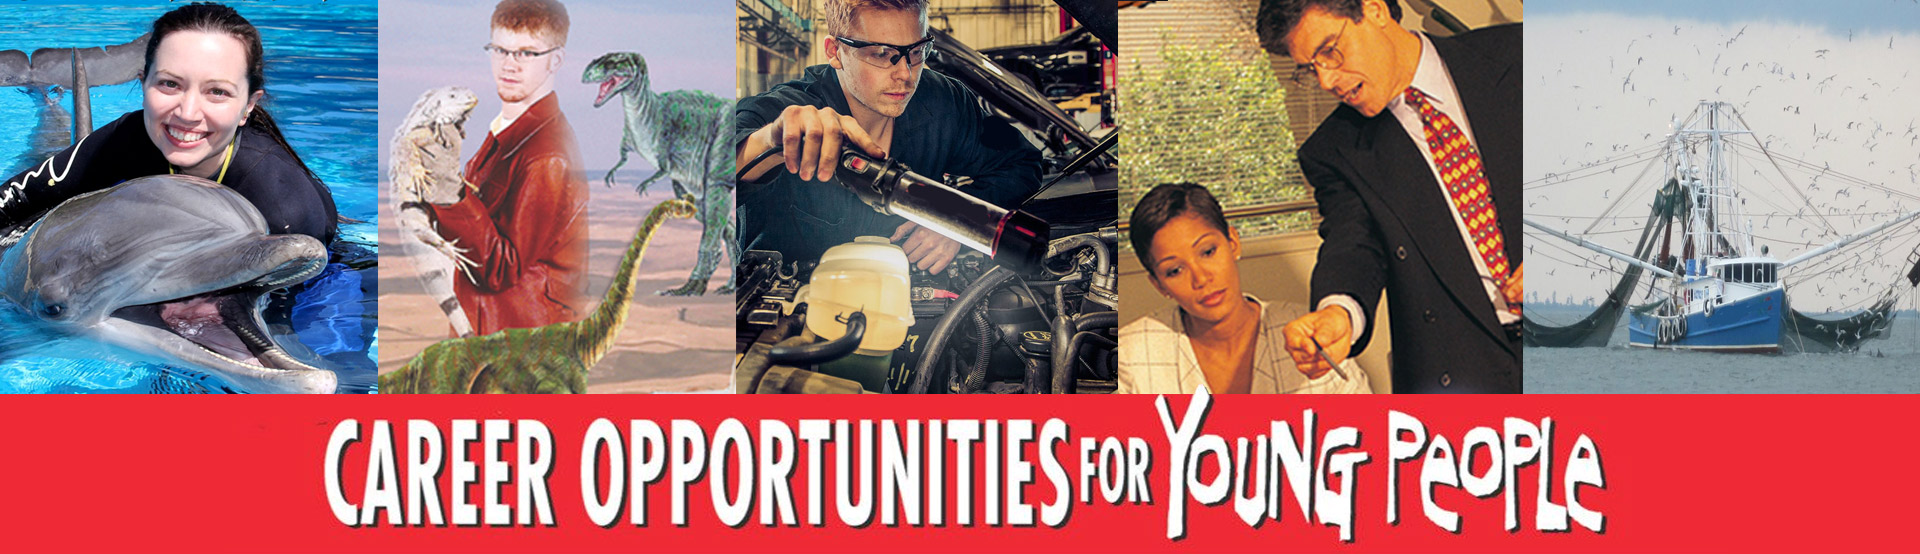 Career Opportunities for Young People